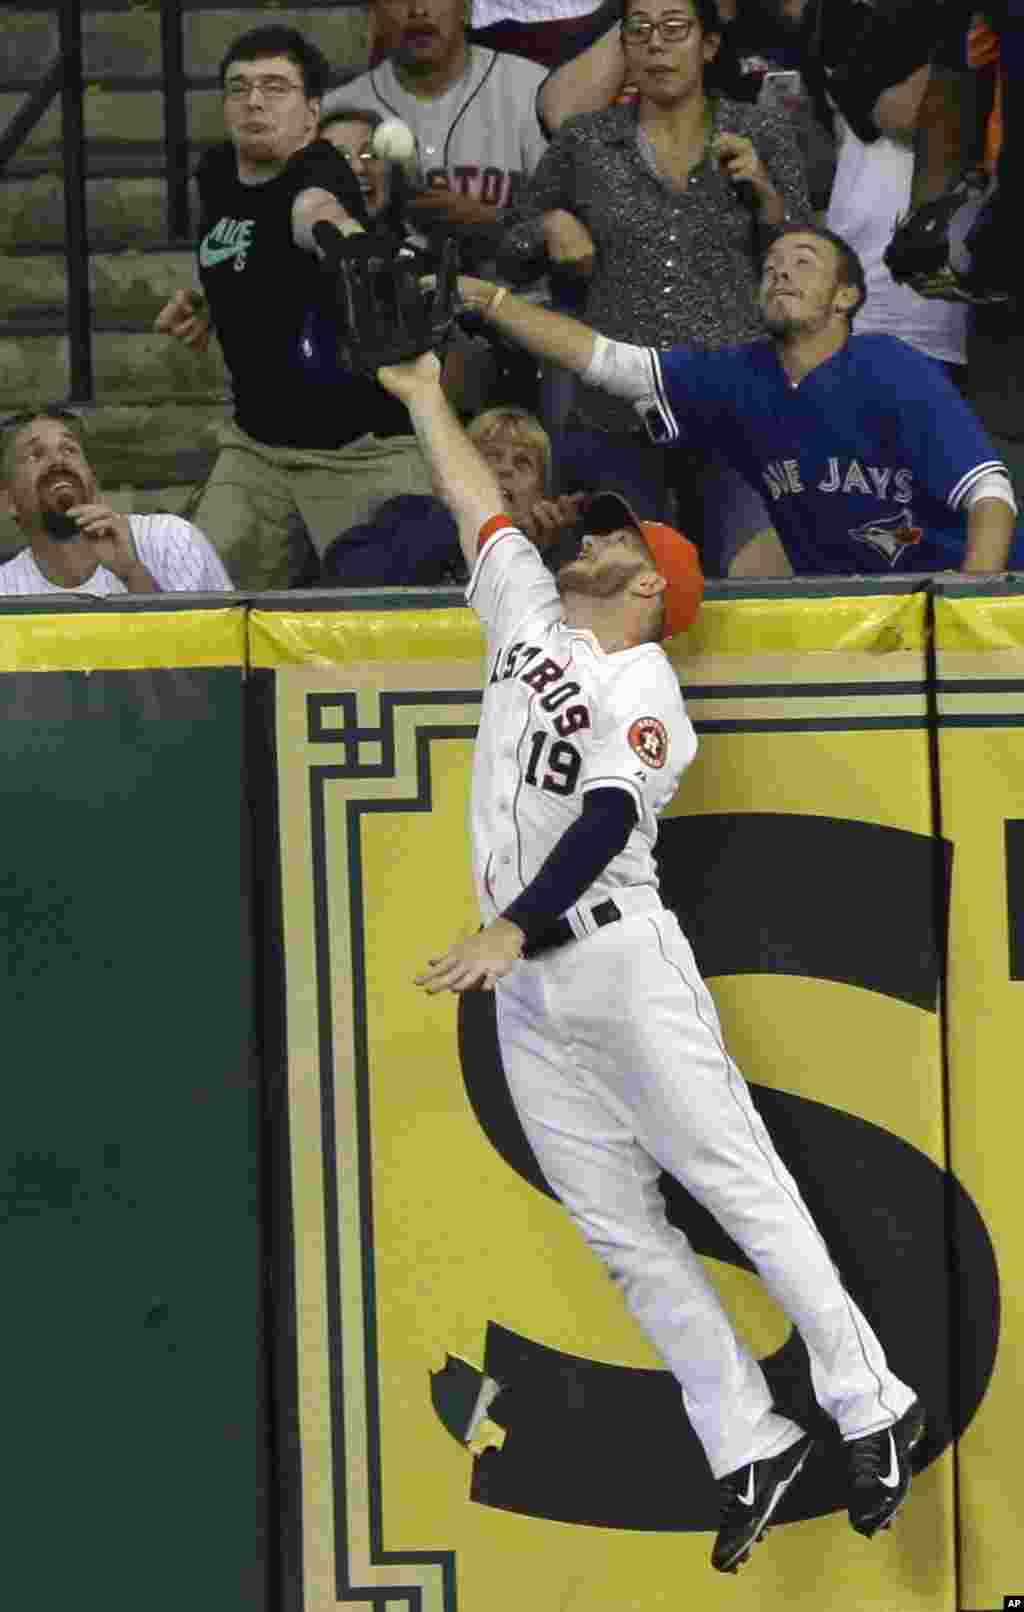 Houston Astros right fielder Robbie Grossman (19) competes with fans for a long ball robbing Toronto Blue Jays&#39; Juan Francisco of a home run in the eighth inning of a baseball game in Houston, Texas, USA, Aug. 2, 2014.